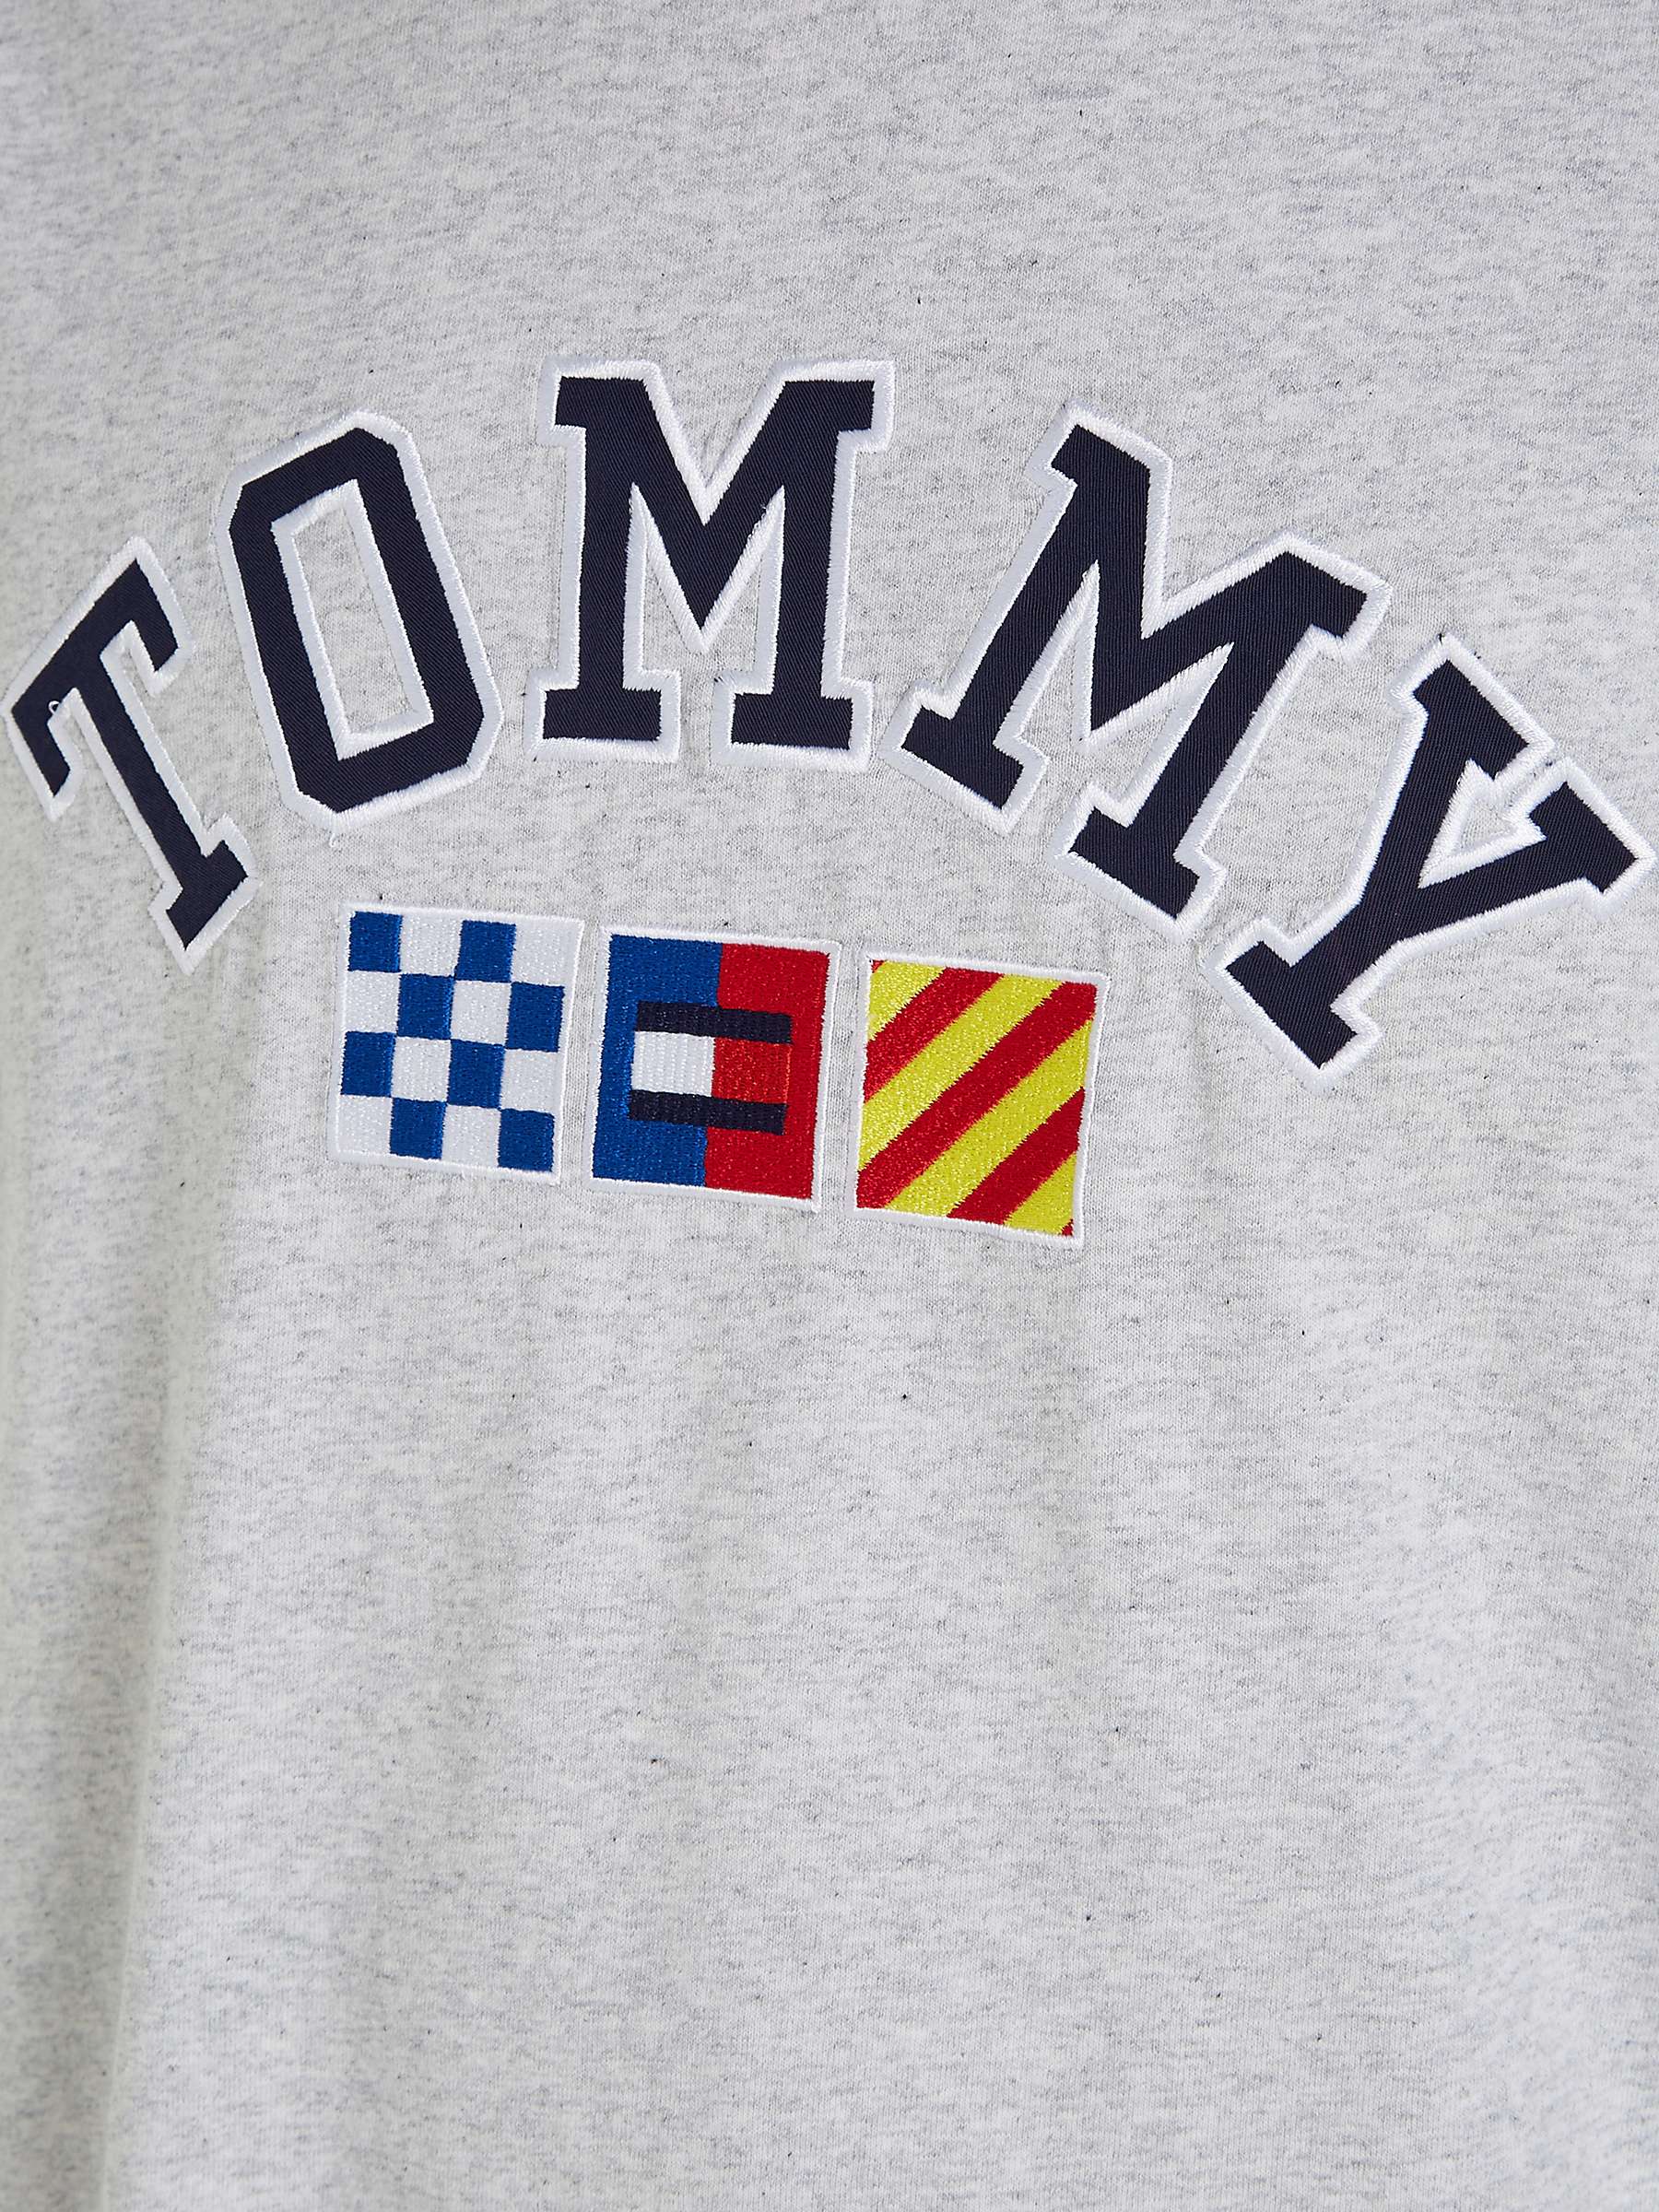 Buy Tommy Jeans Archive Sailing T-Shirt, Grey Online at johnlewis.com